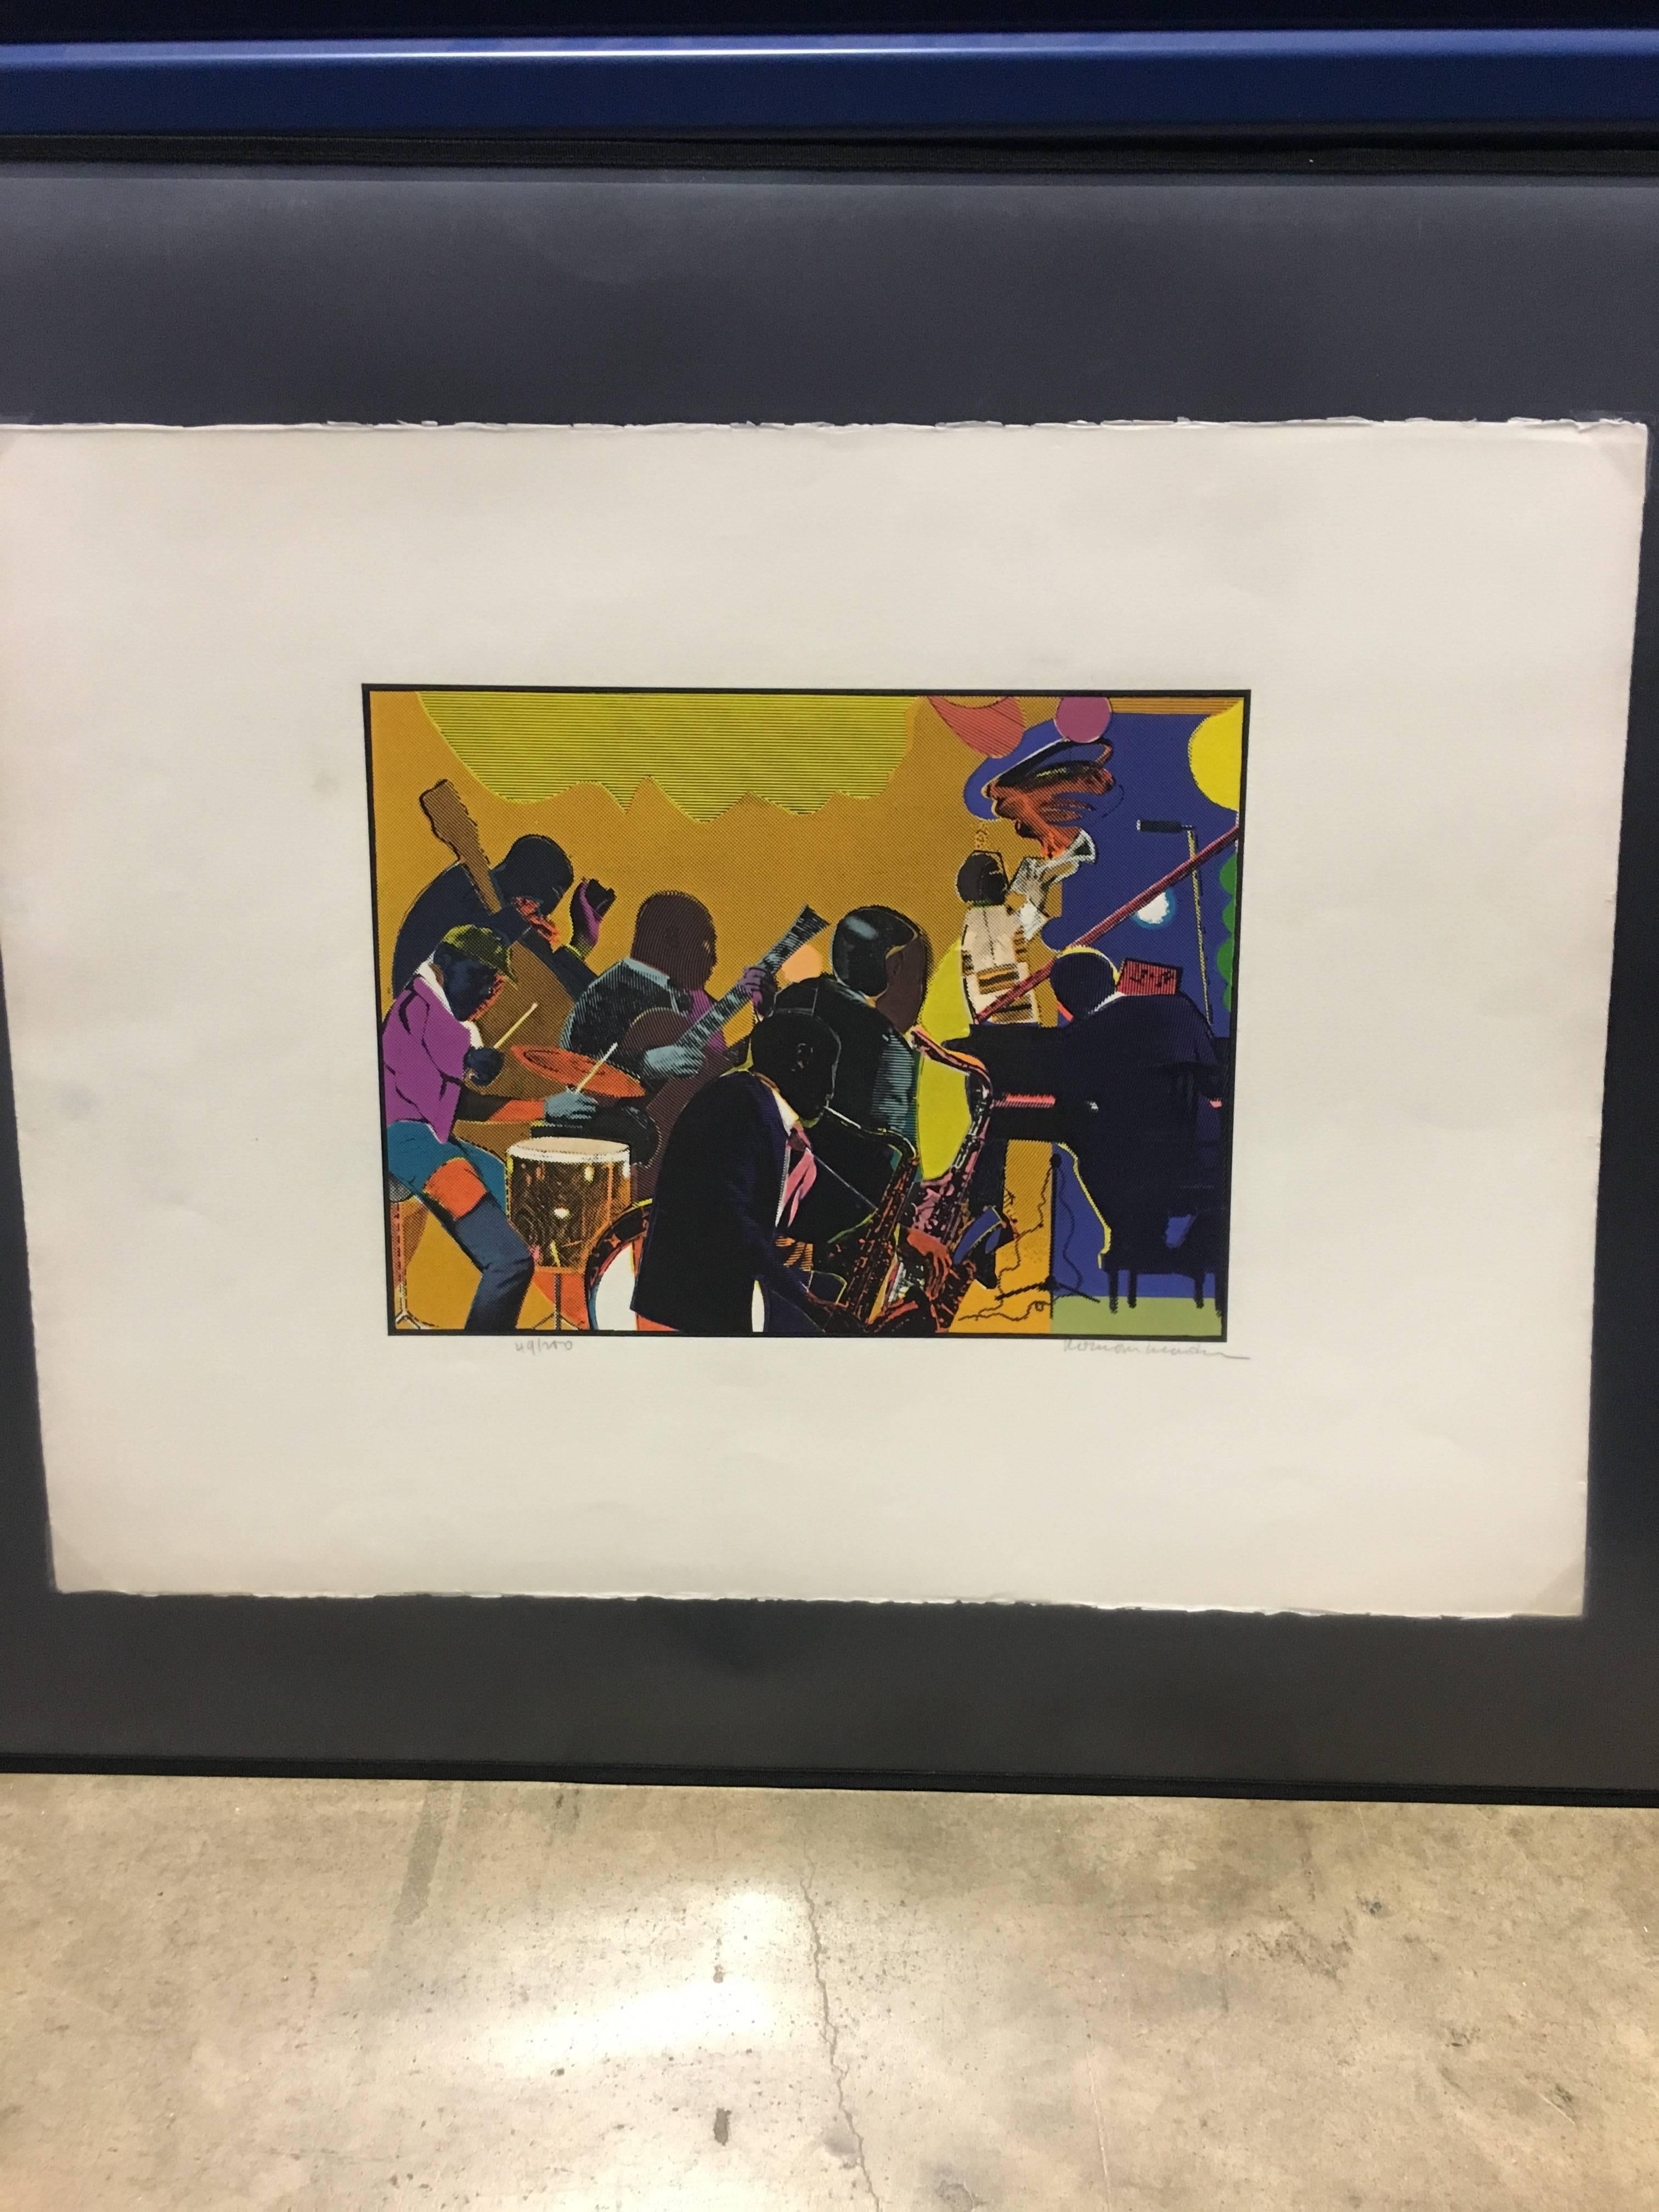 OUT CHORUS, 1979-80, from The Jazz Series - Black Figurative Print by Romare Bearden